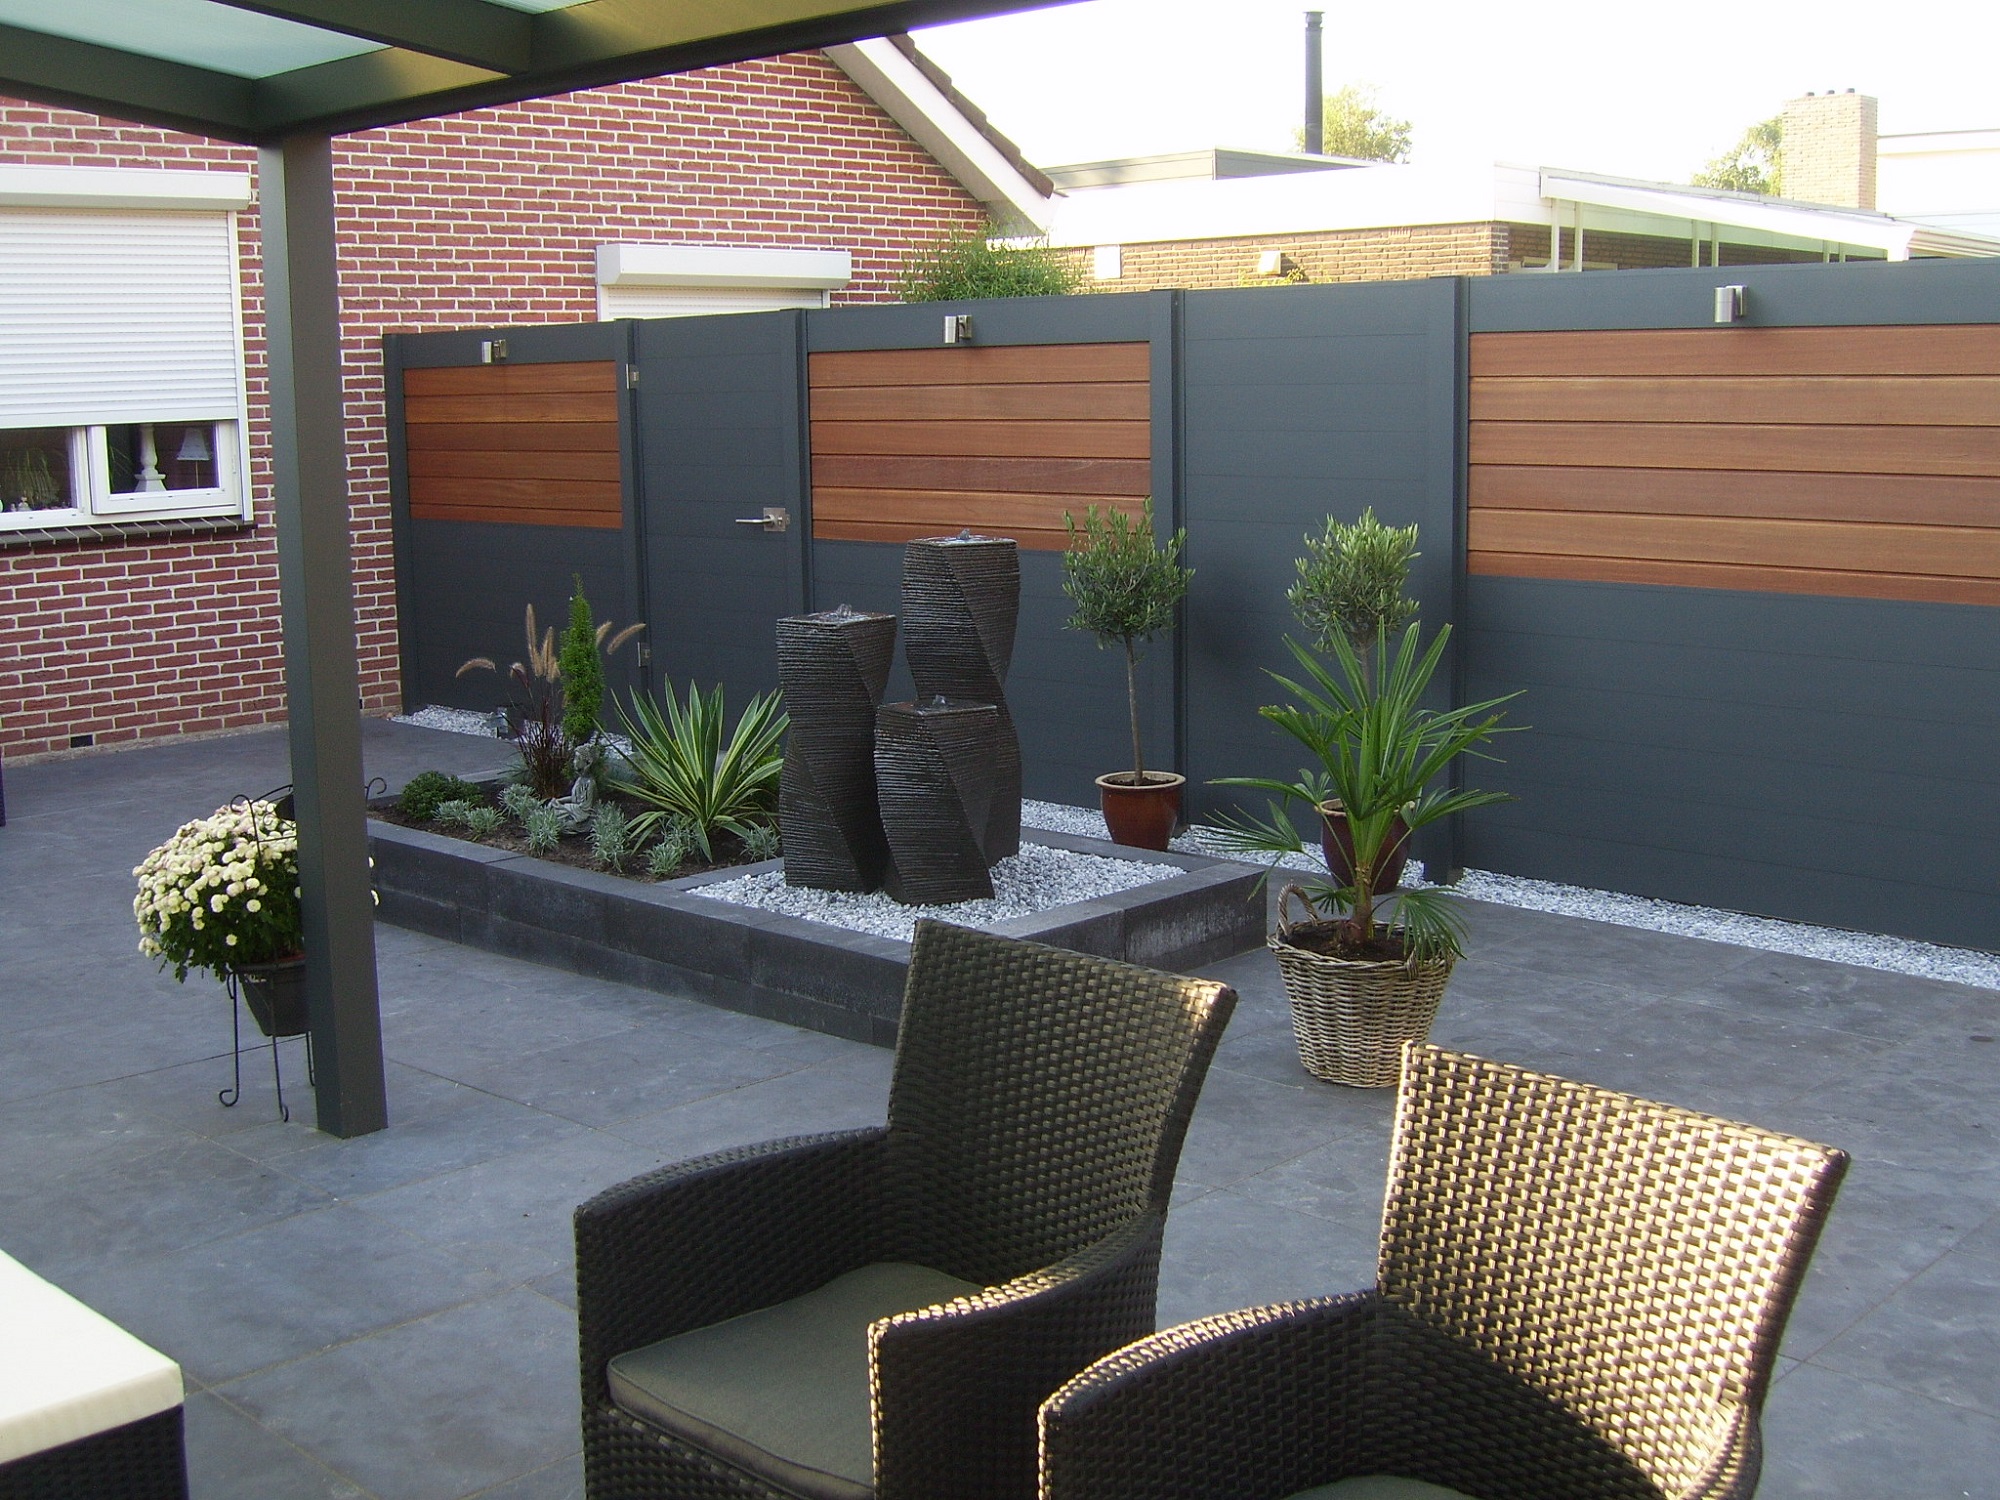 Fence-Made-From-Aluminium-and-hardwood-boards.jpg